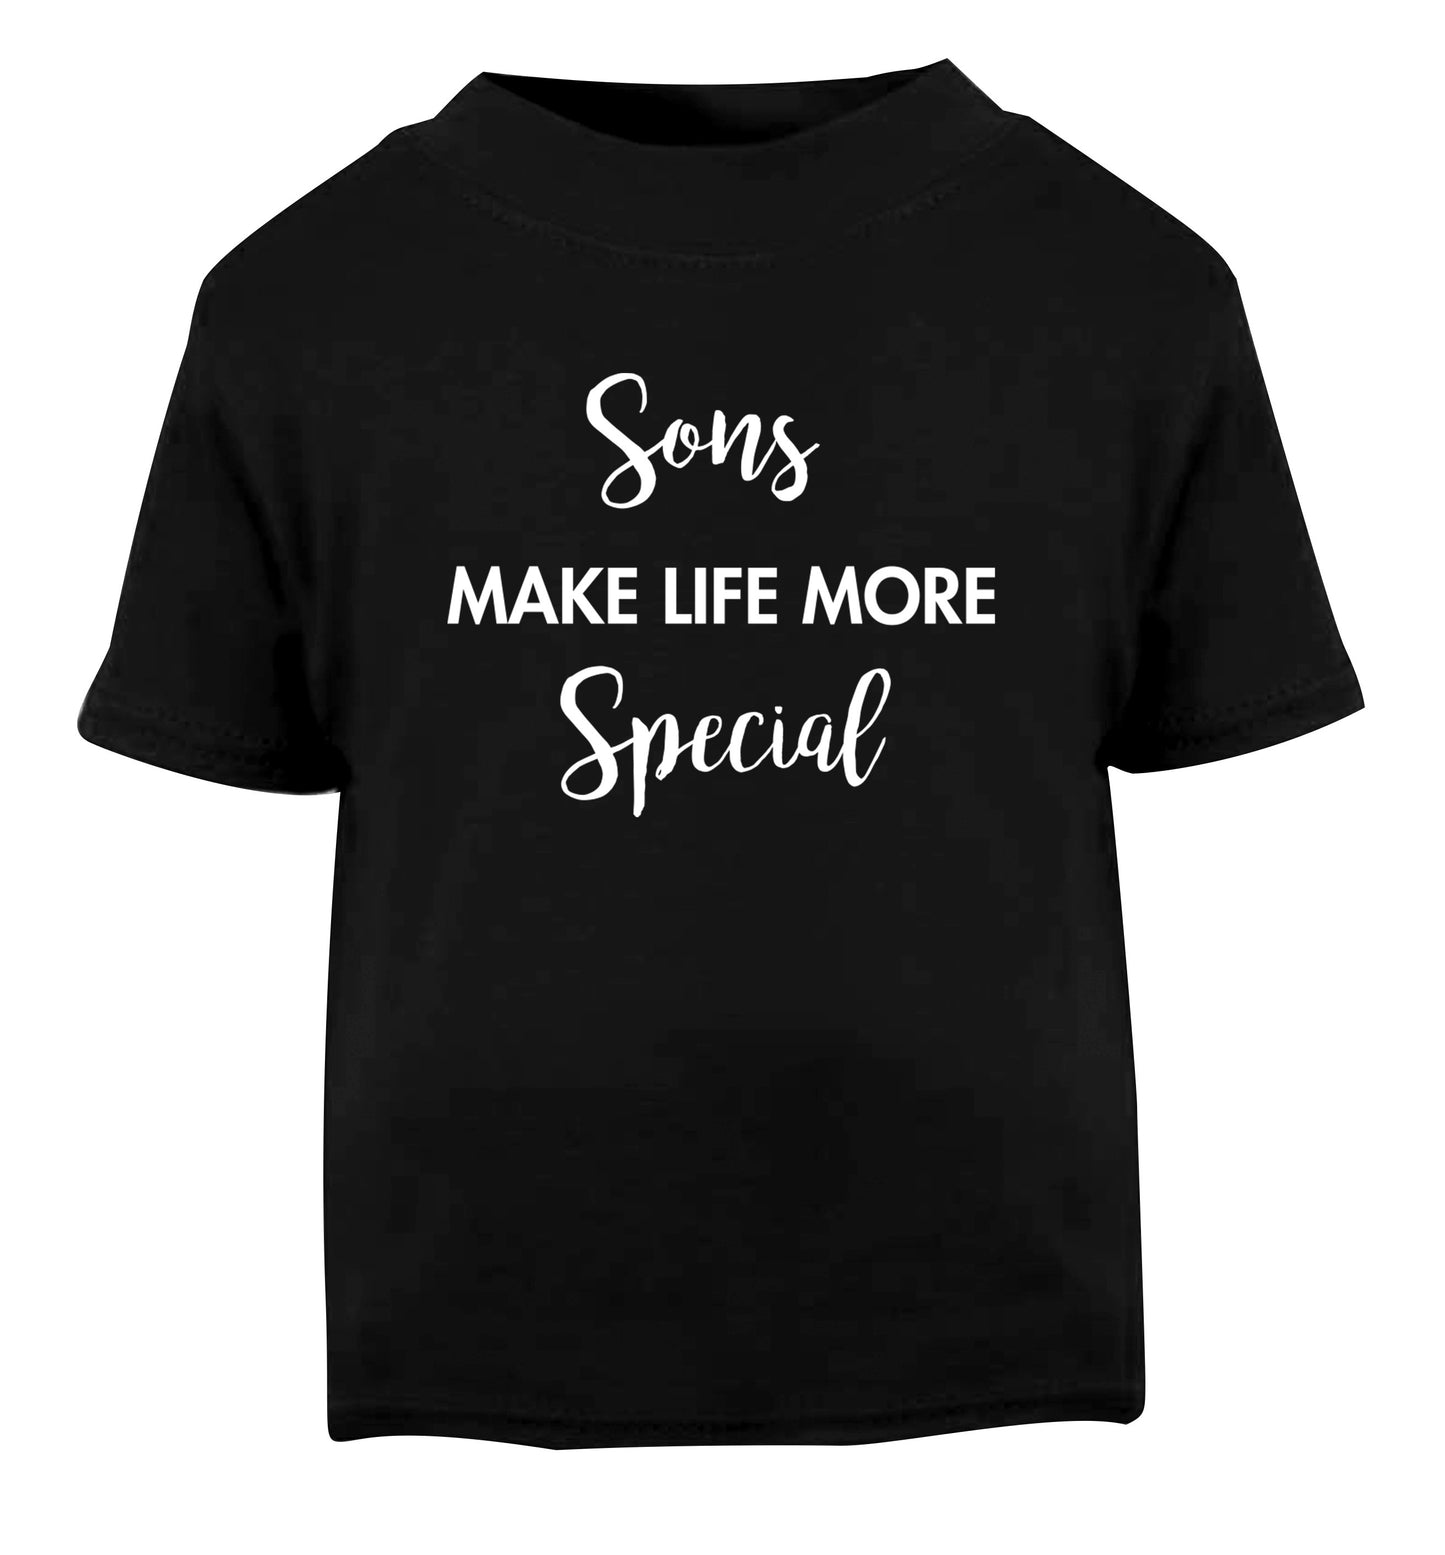 Sons make life more special Black Baby Toddler Tshirt 2 years